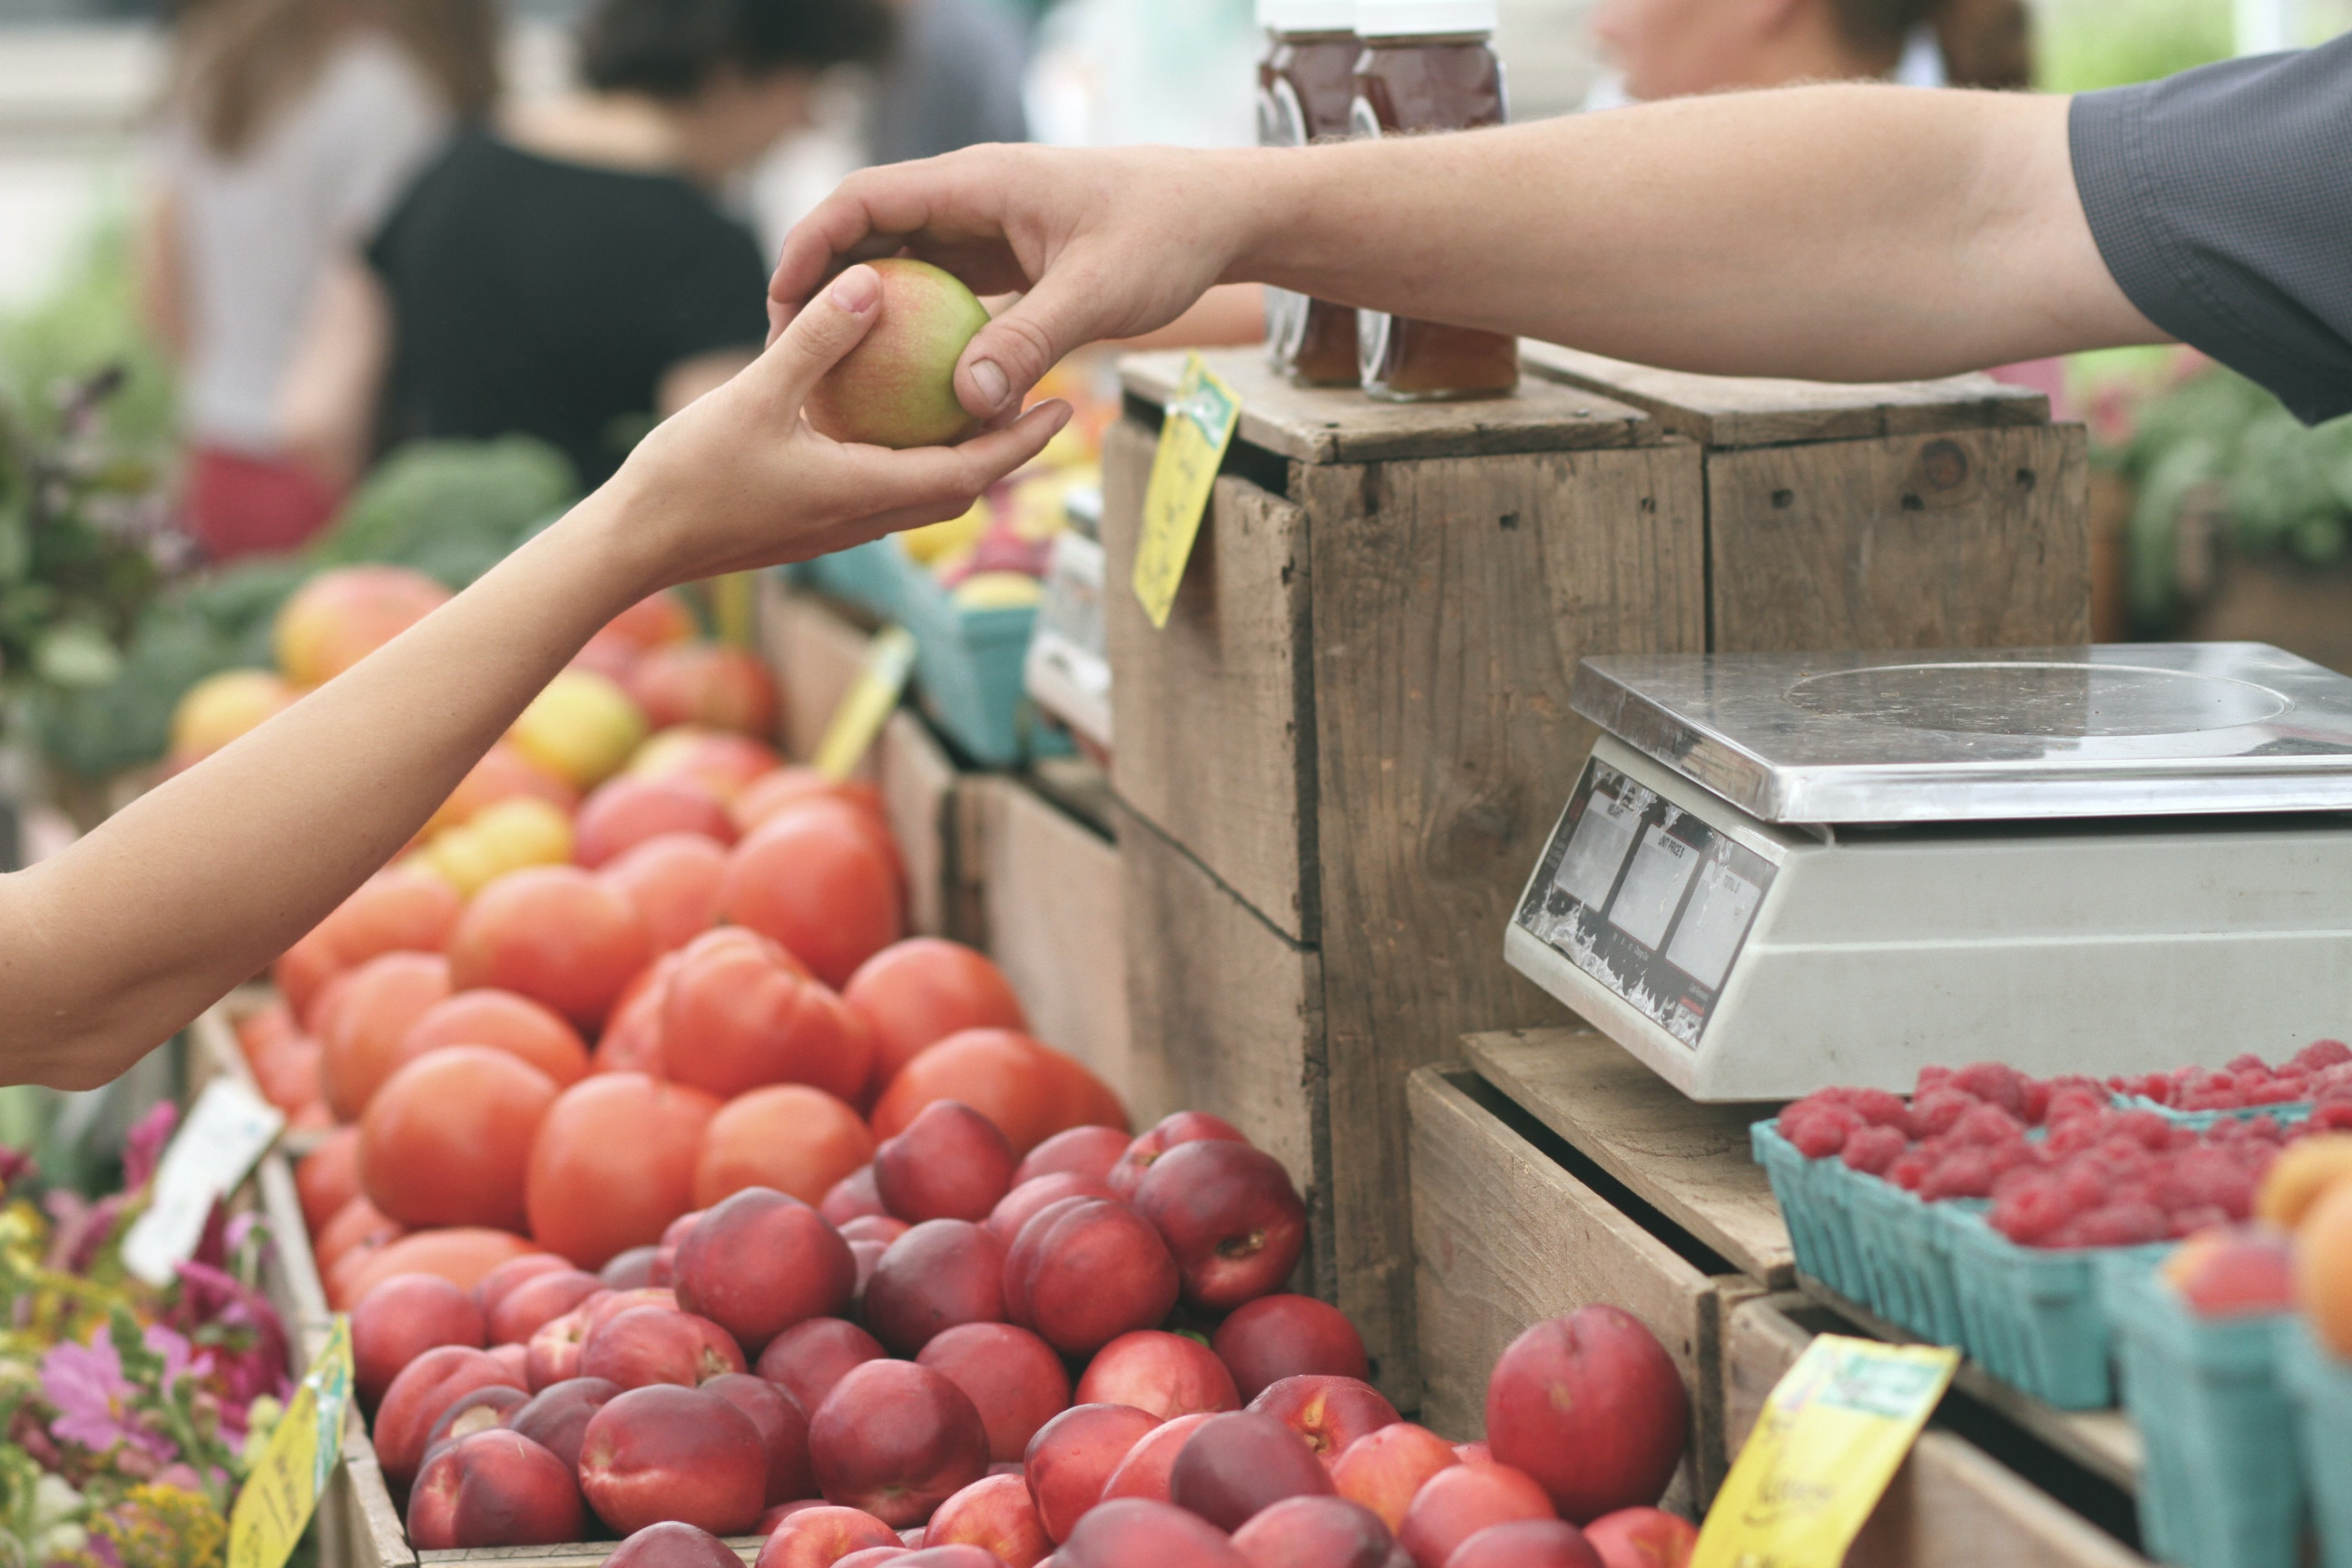 Recent gas price increases heavily affected the price of food | Photo by Erik Scheel from Pexels